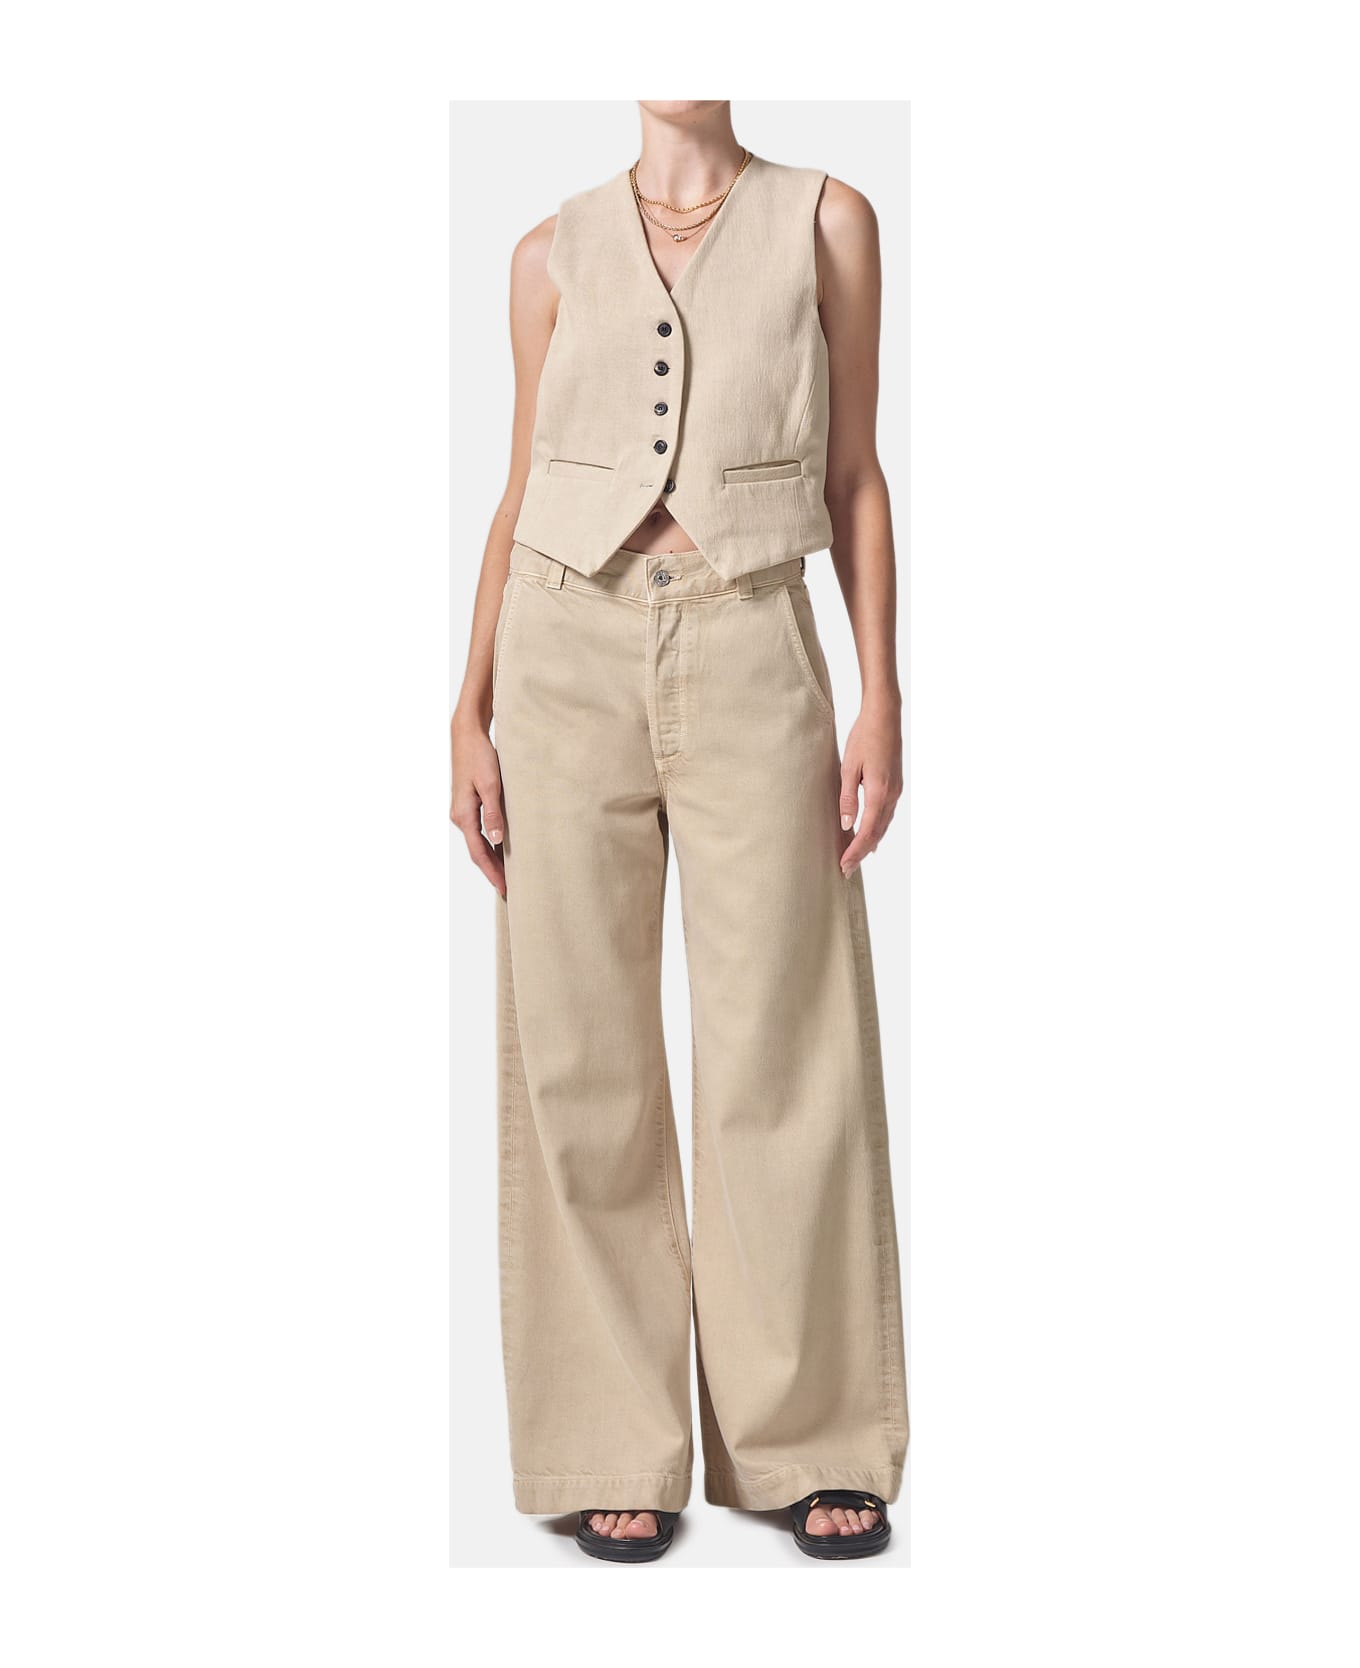 Citizens of Humanity Beverly Denim Pants - Beige